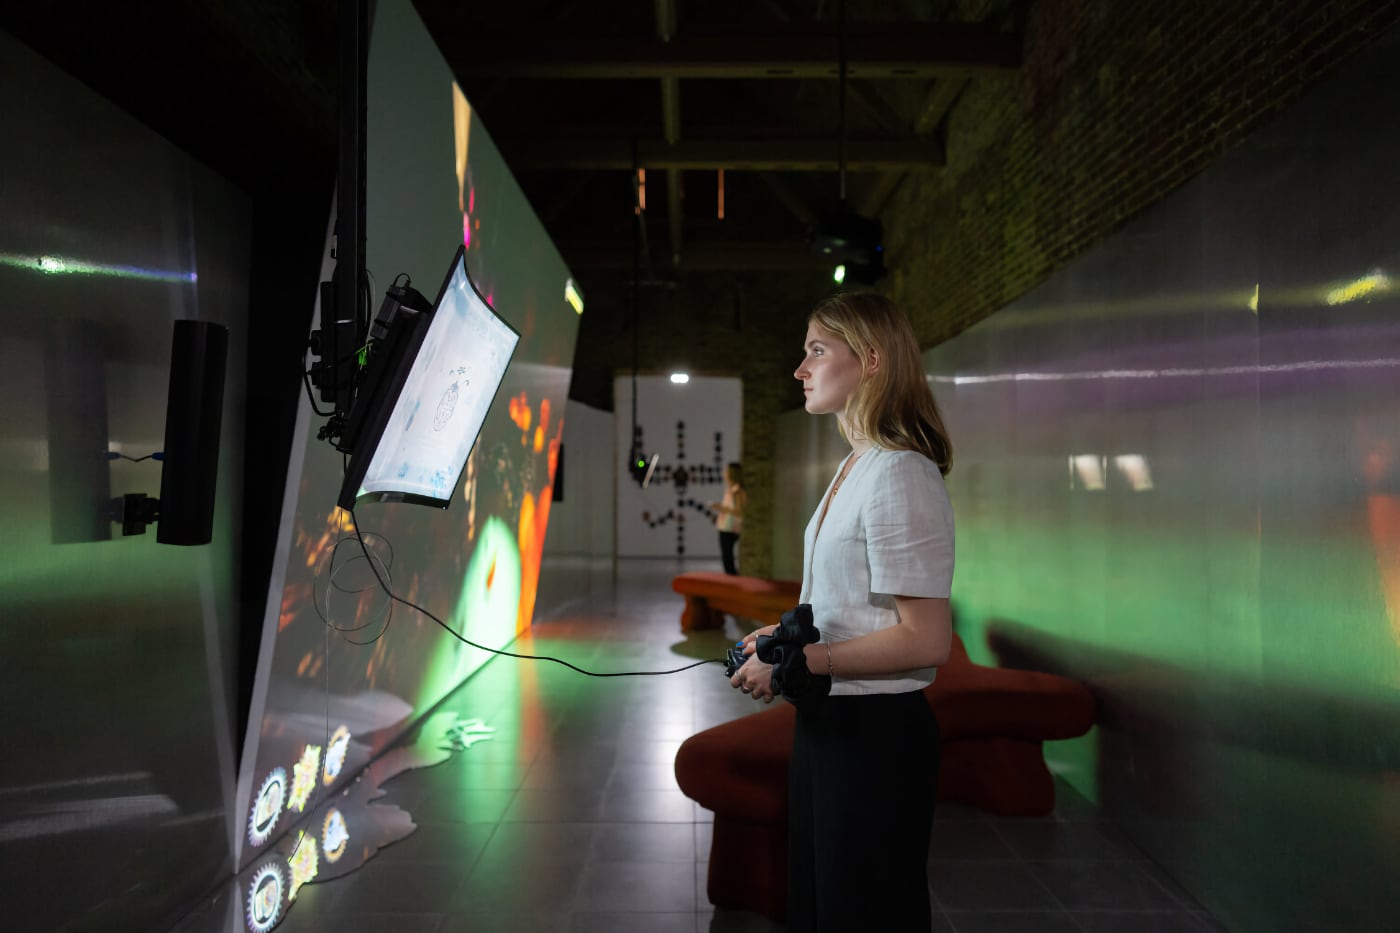 A woman experiencing the interactive media exhibition “Third World: The Bottom Dimension” at Serpentine Galleries in London.